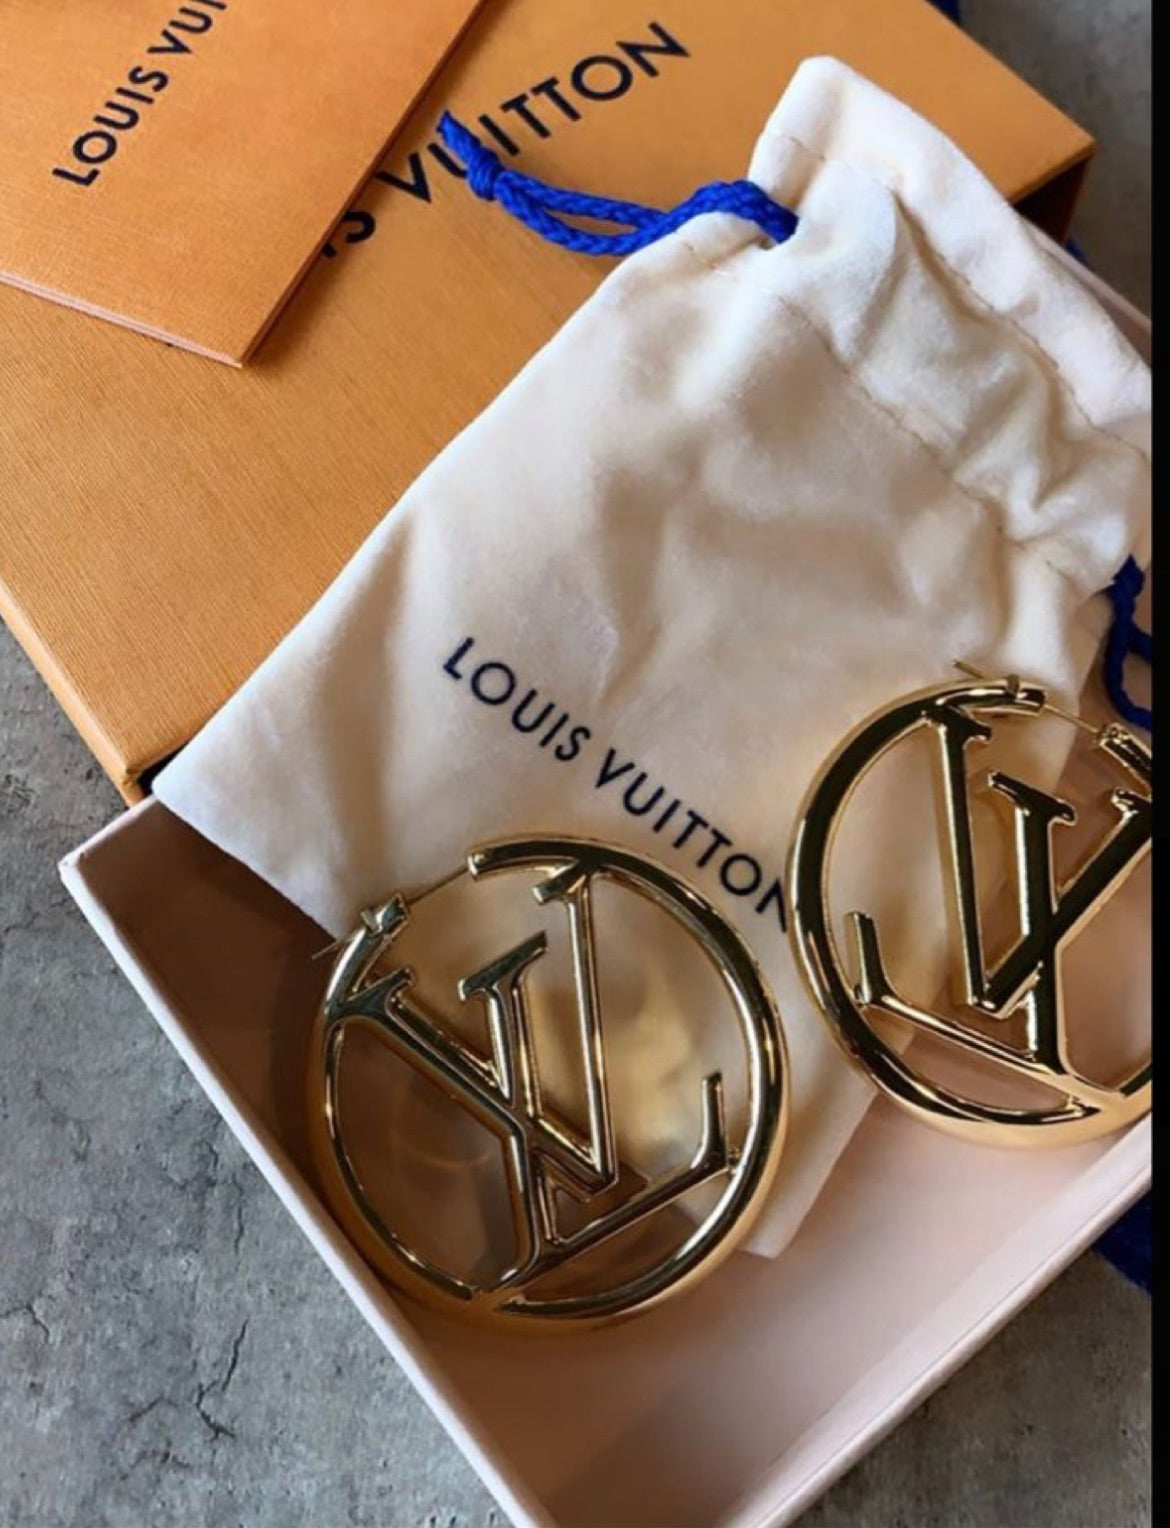 Louis Vuitton Gold Hoop V Earrings w/ Box (Looks New, Excellent